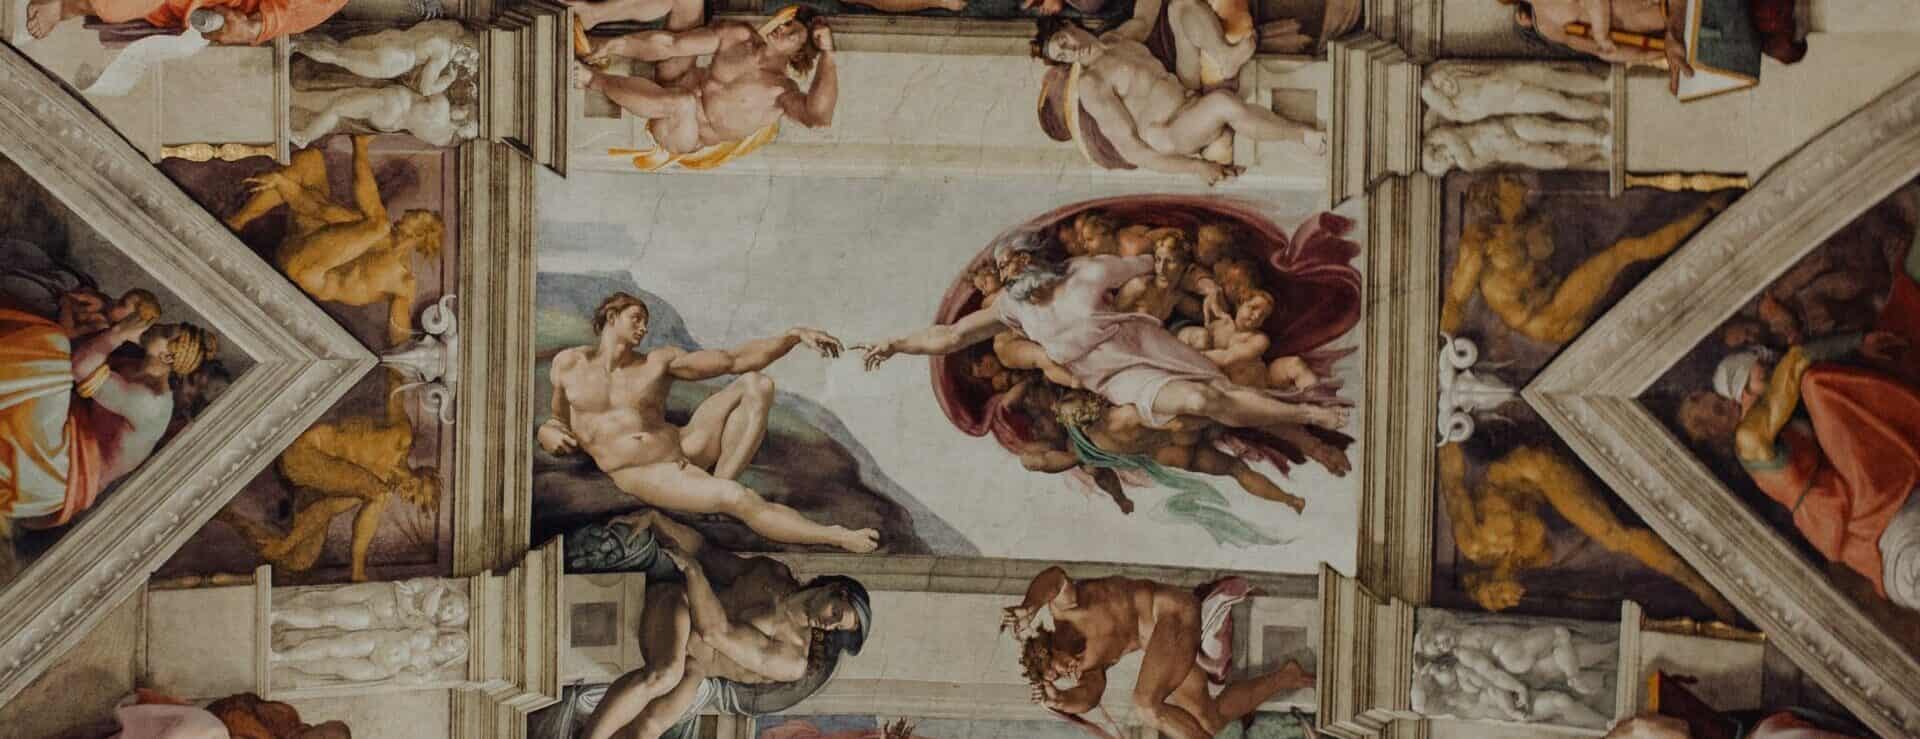 The Creation of Adam Painting on the Roof of Sistine Chapel